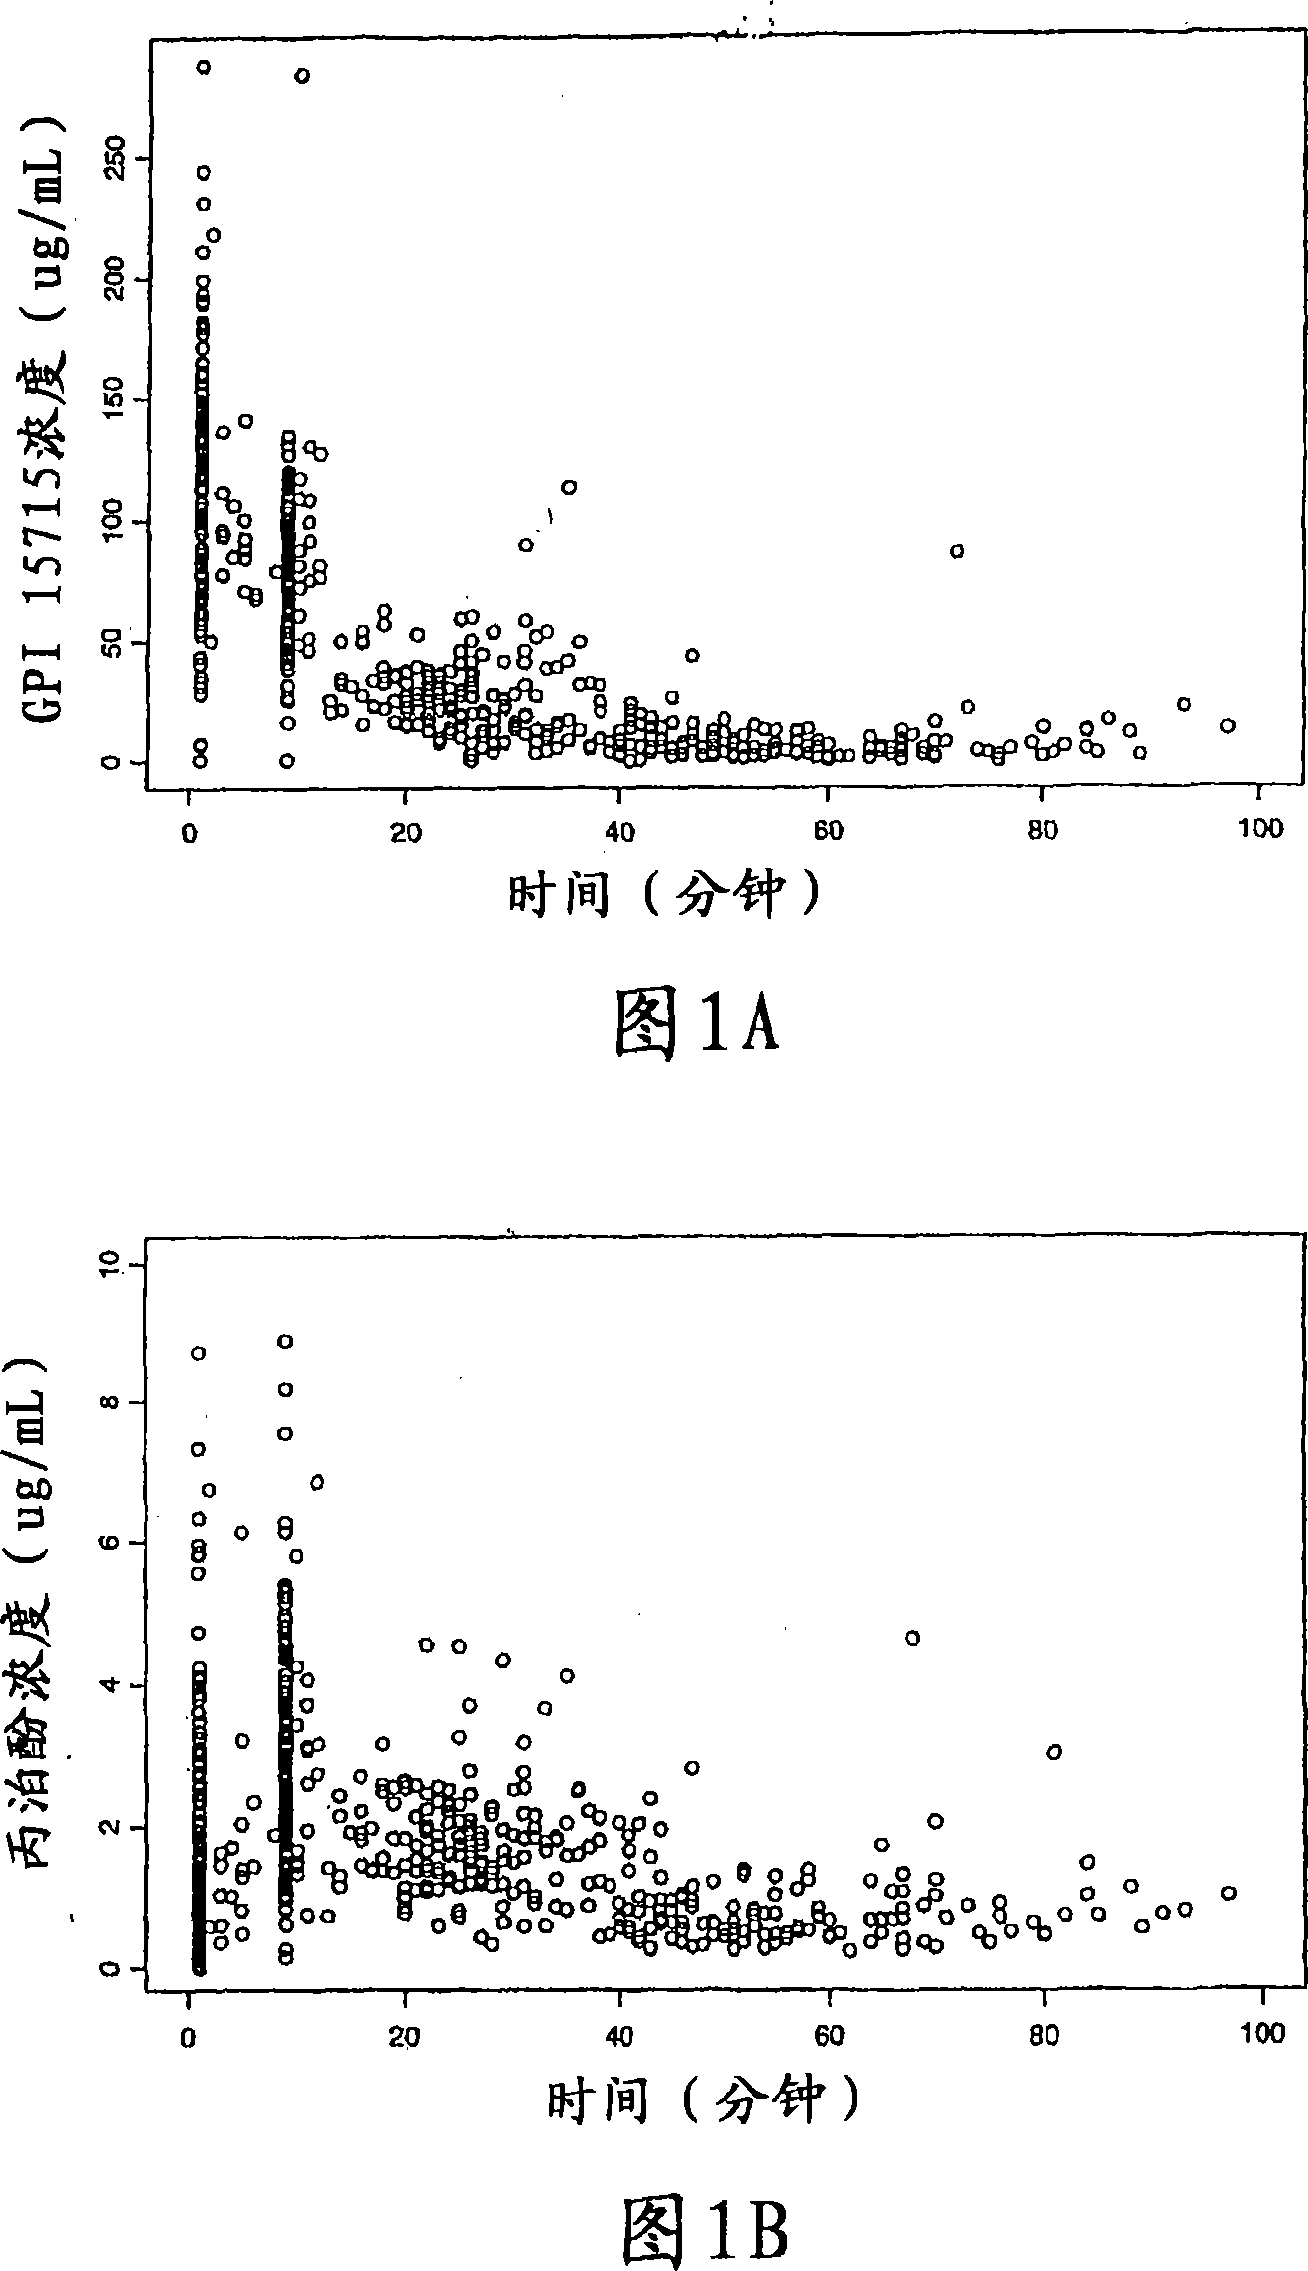 Methods of dosing propofol prodrugs for inducing mild to moderate levels of sedation